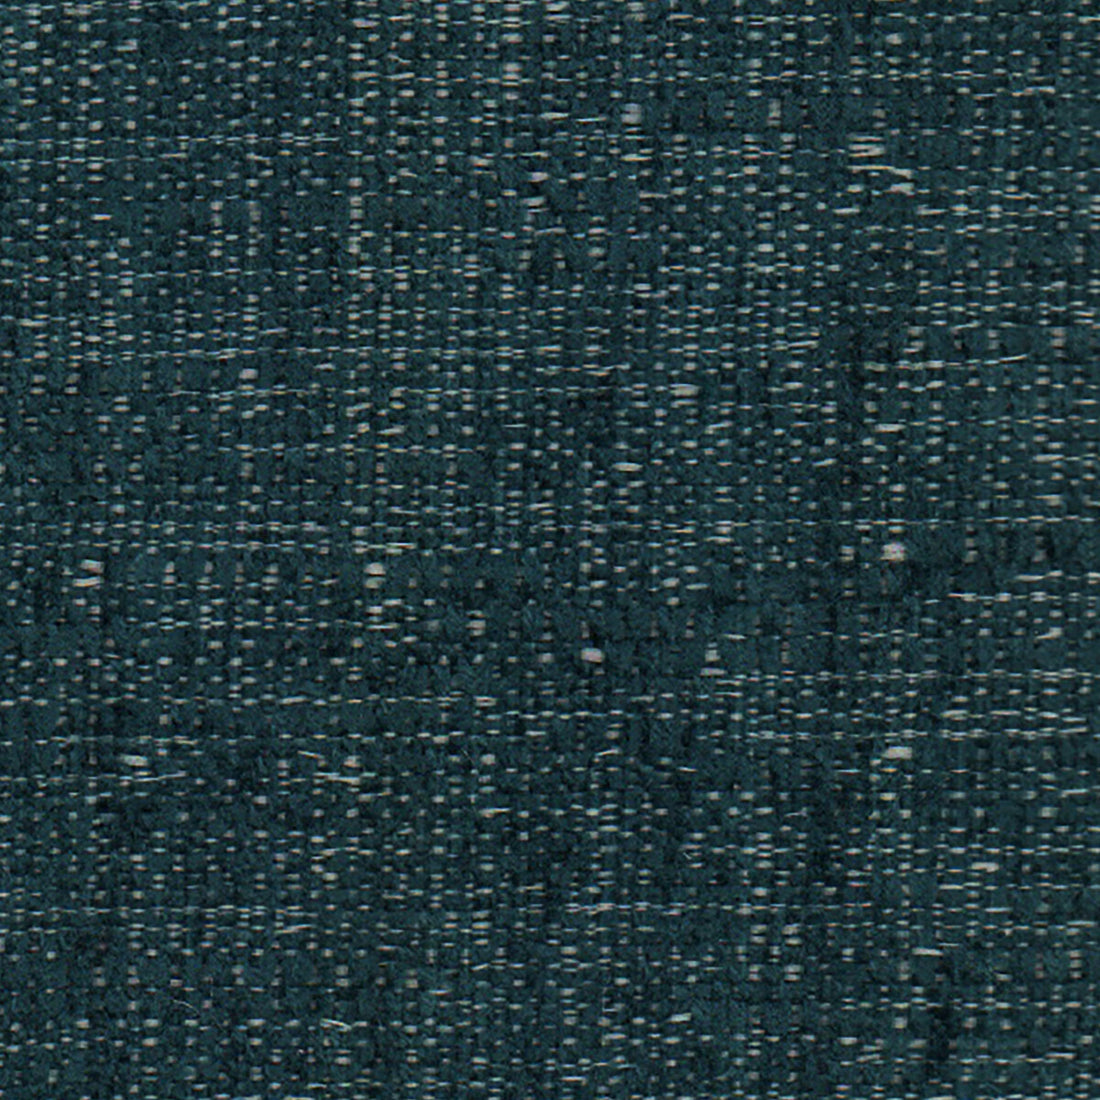 Kravet Smart fabric in 34622-13 color - pattern 34622.13.0 - by Kravet Smart in the Performance Crypton Home collection